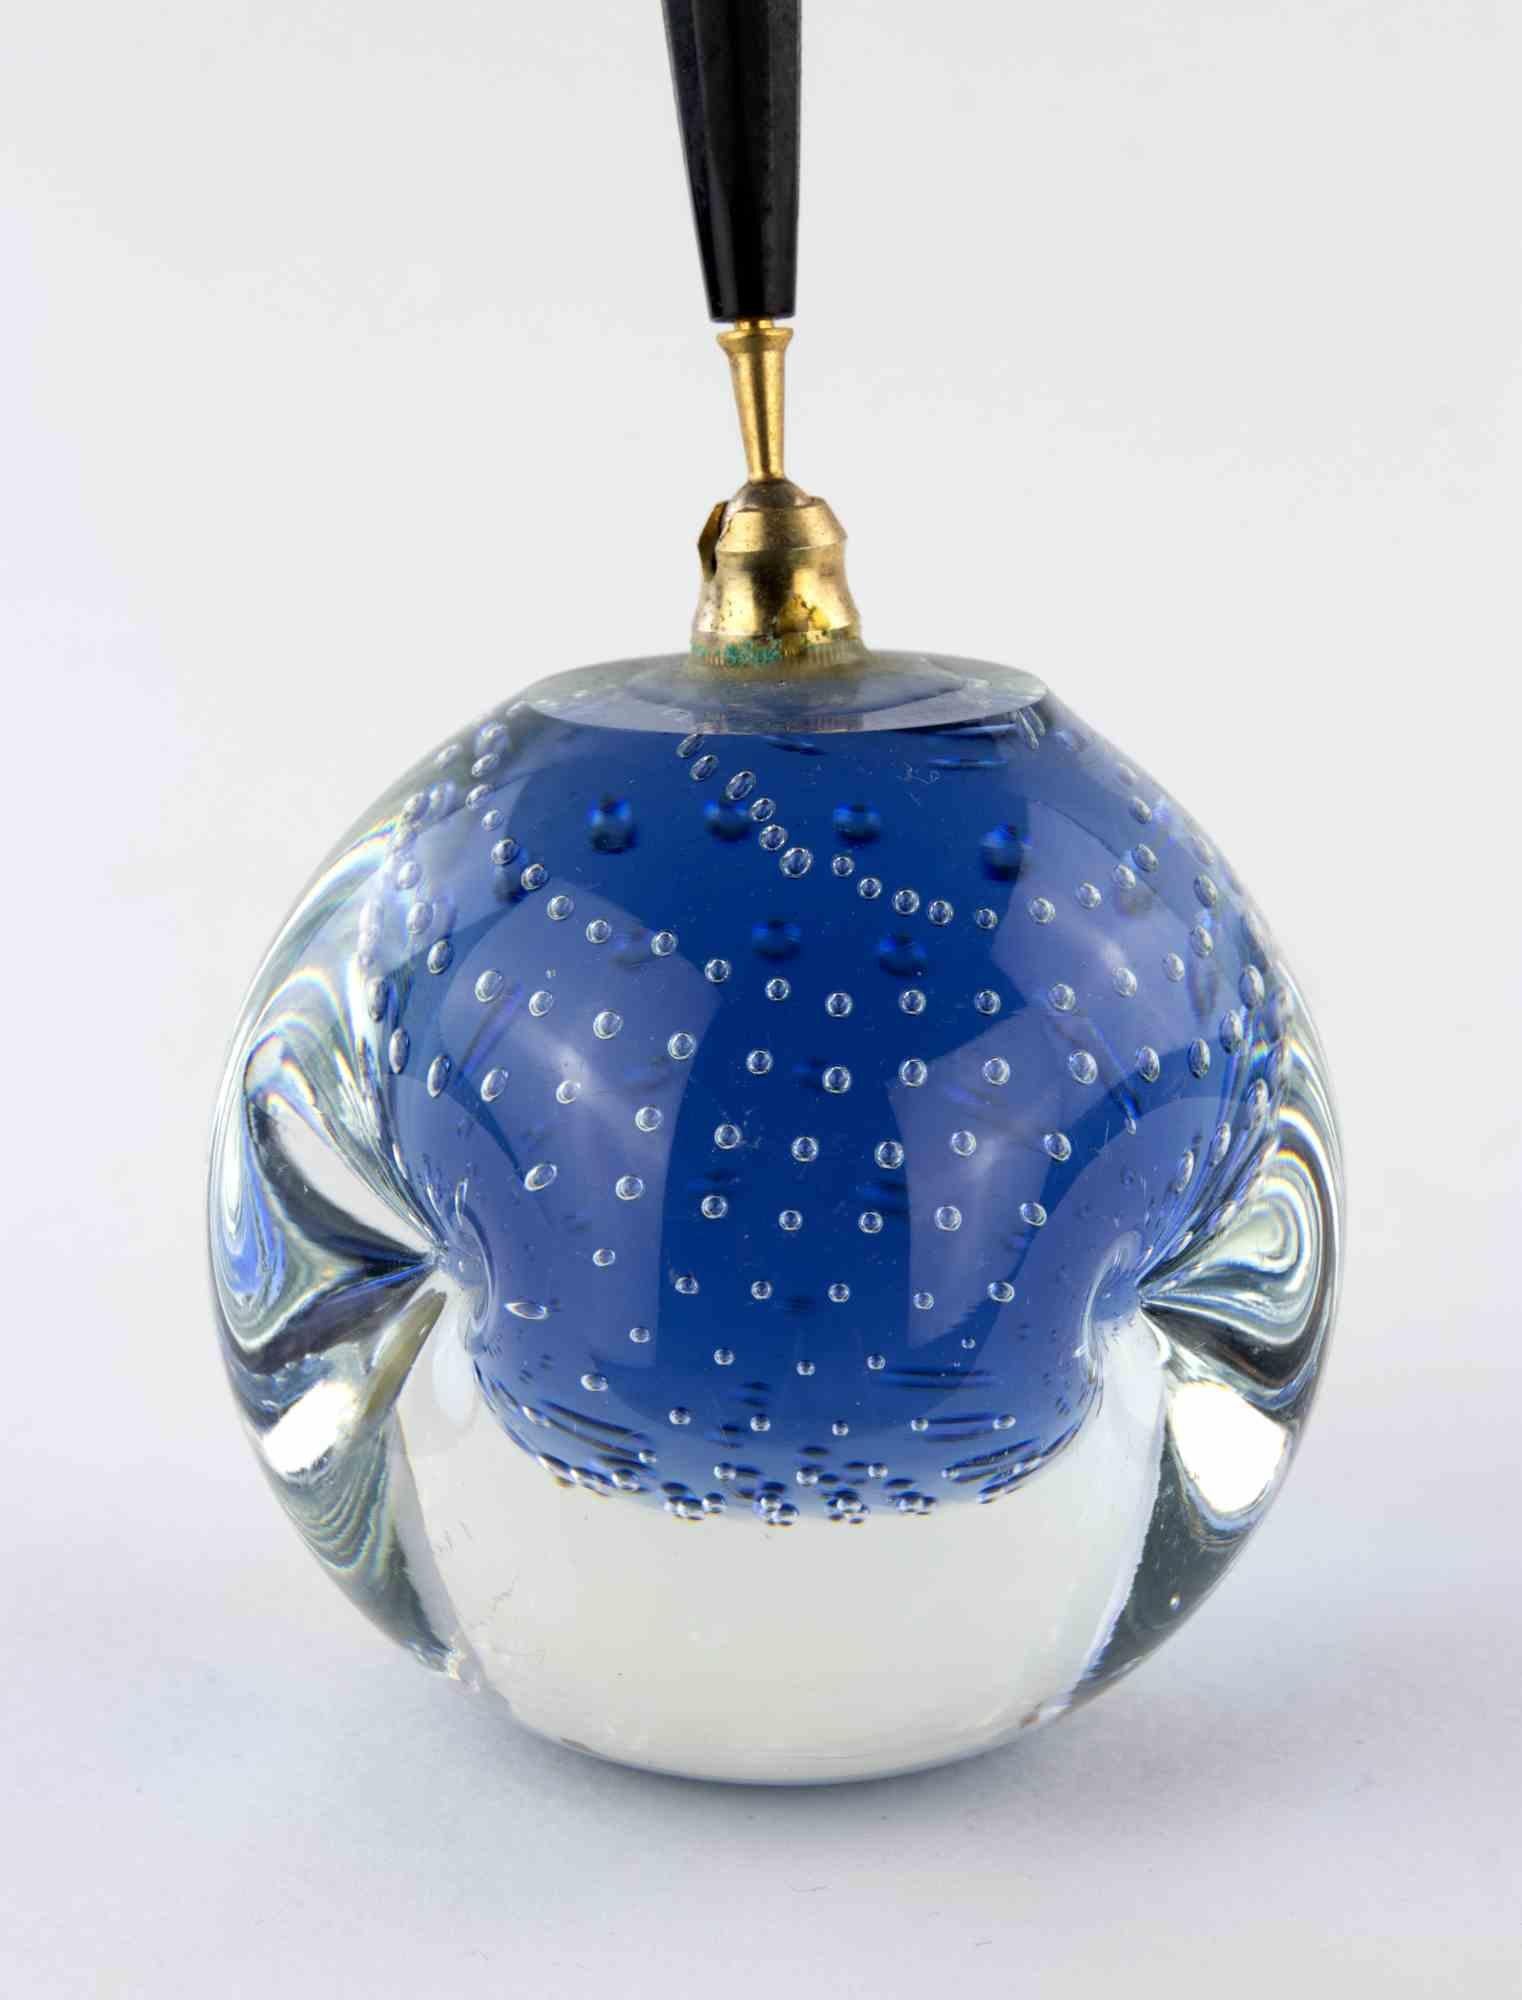 Murano Pen holder is a decorative object realized in the 1970s.

A decorative blue colored Murano glass pen holder.

An elegant object to be collect.